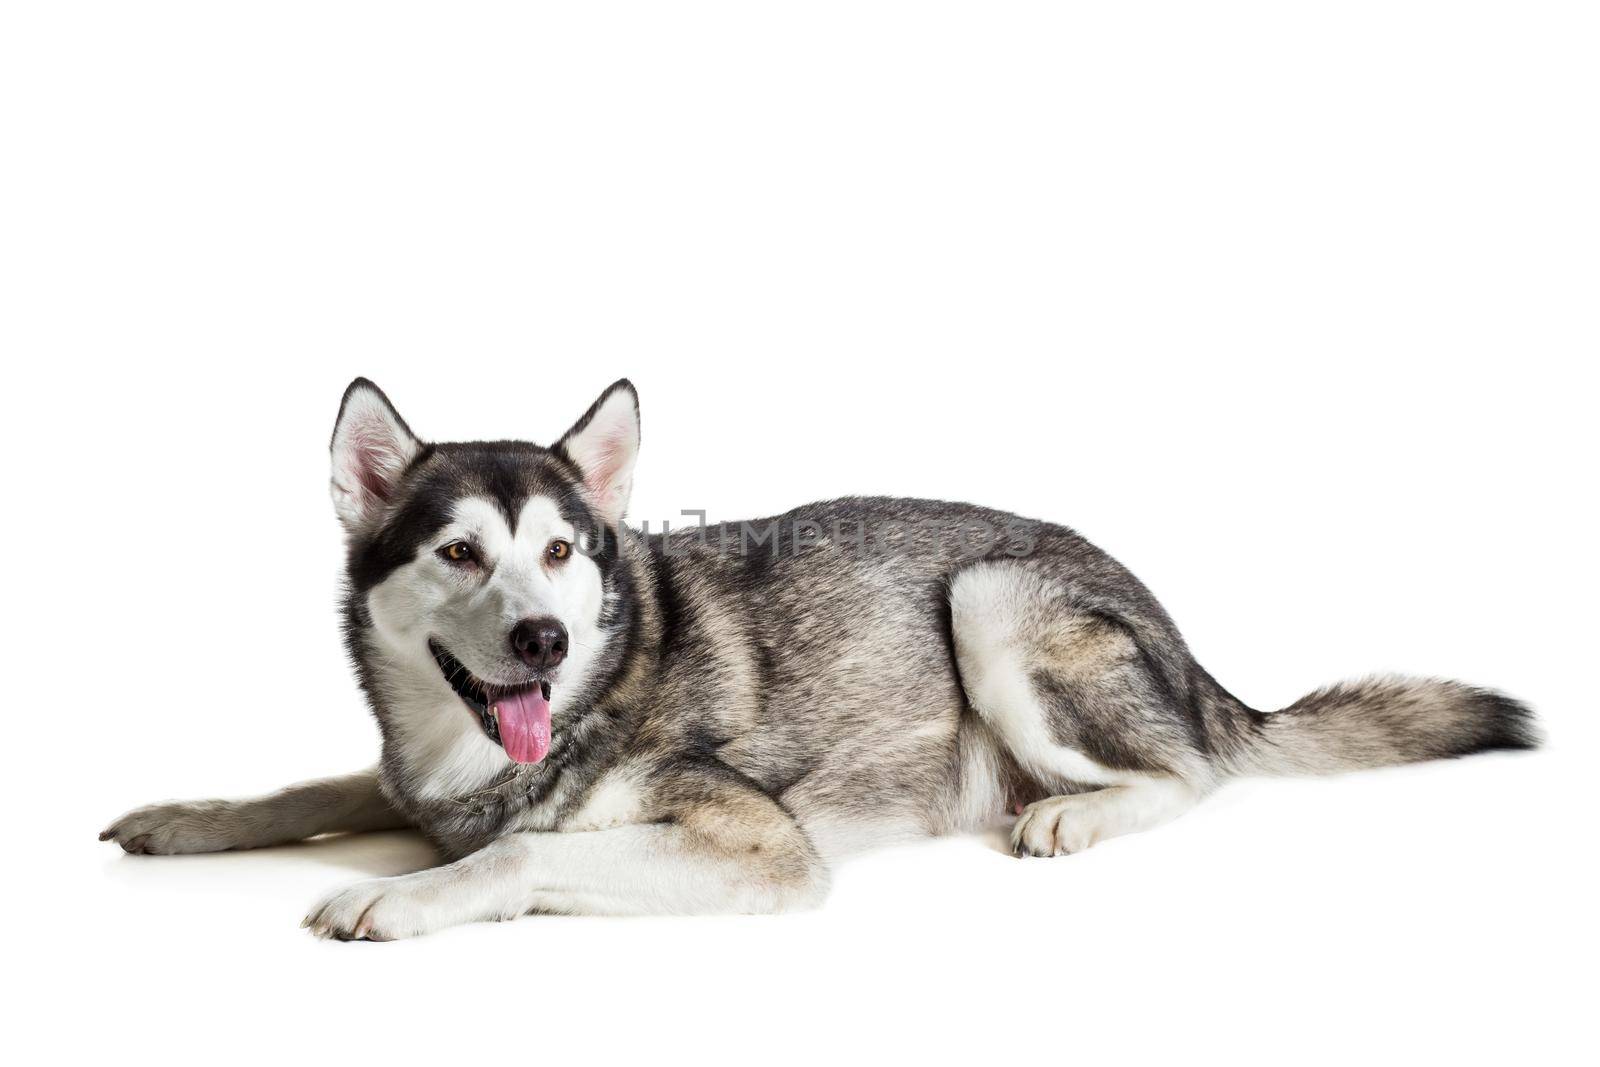 Alaskan Malamute sitting in front of white background. Dog lying on the floor